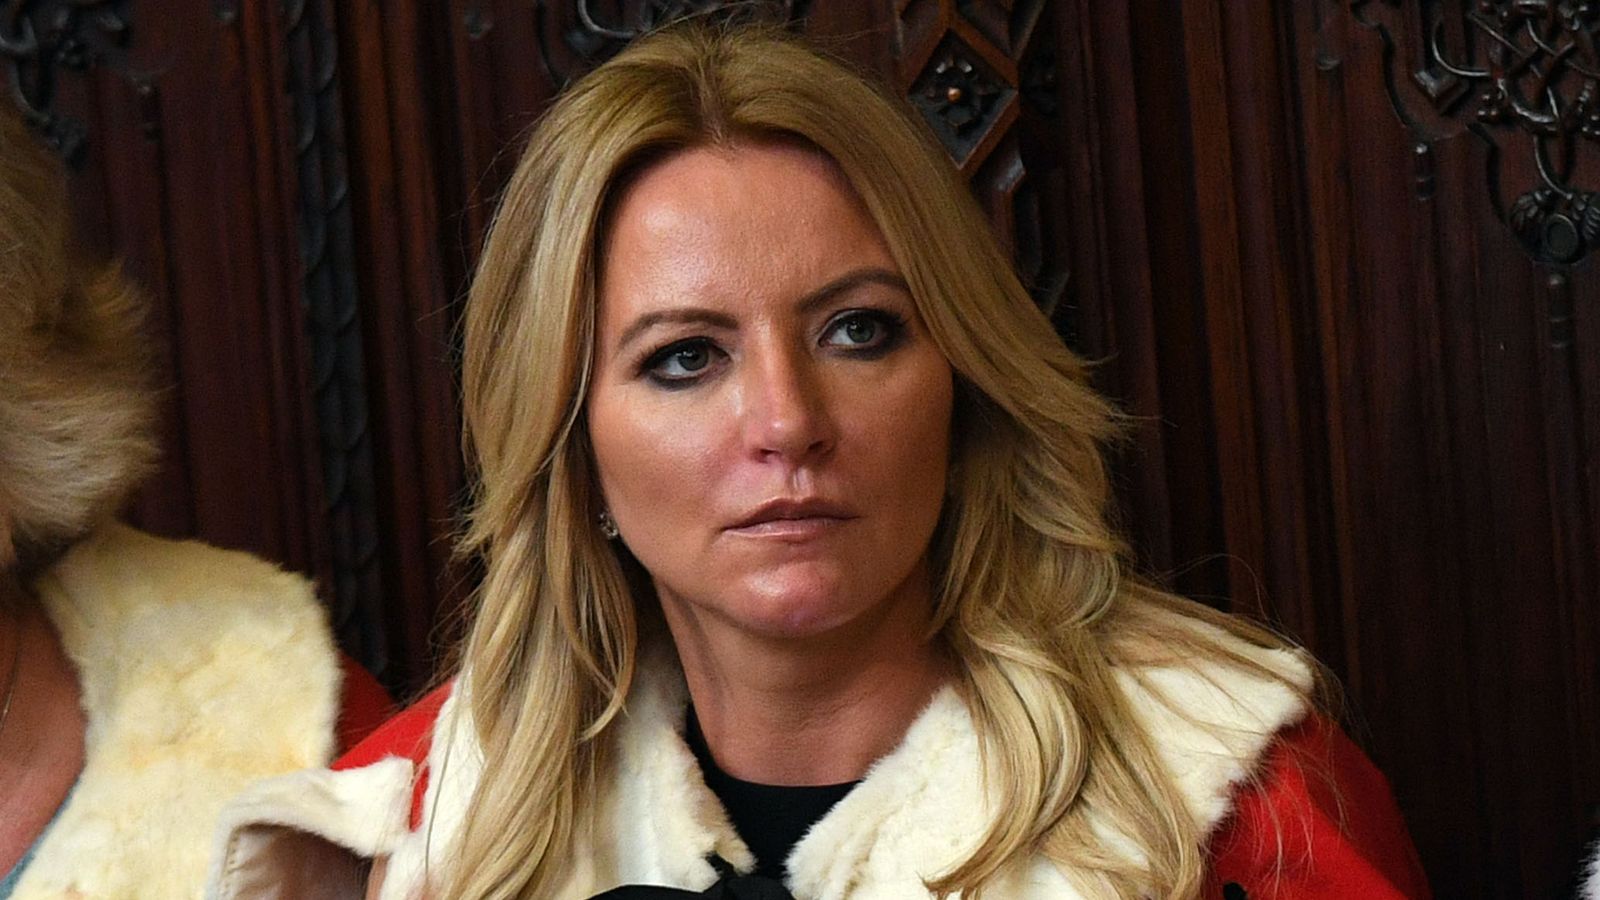 Baroness Michelle Mone takes a leave of absence from House of Lords amid PPE contracts controversy